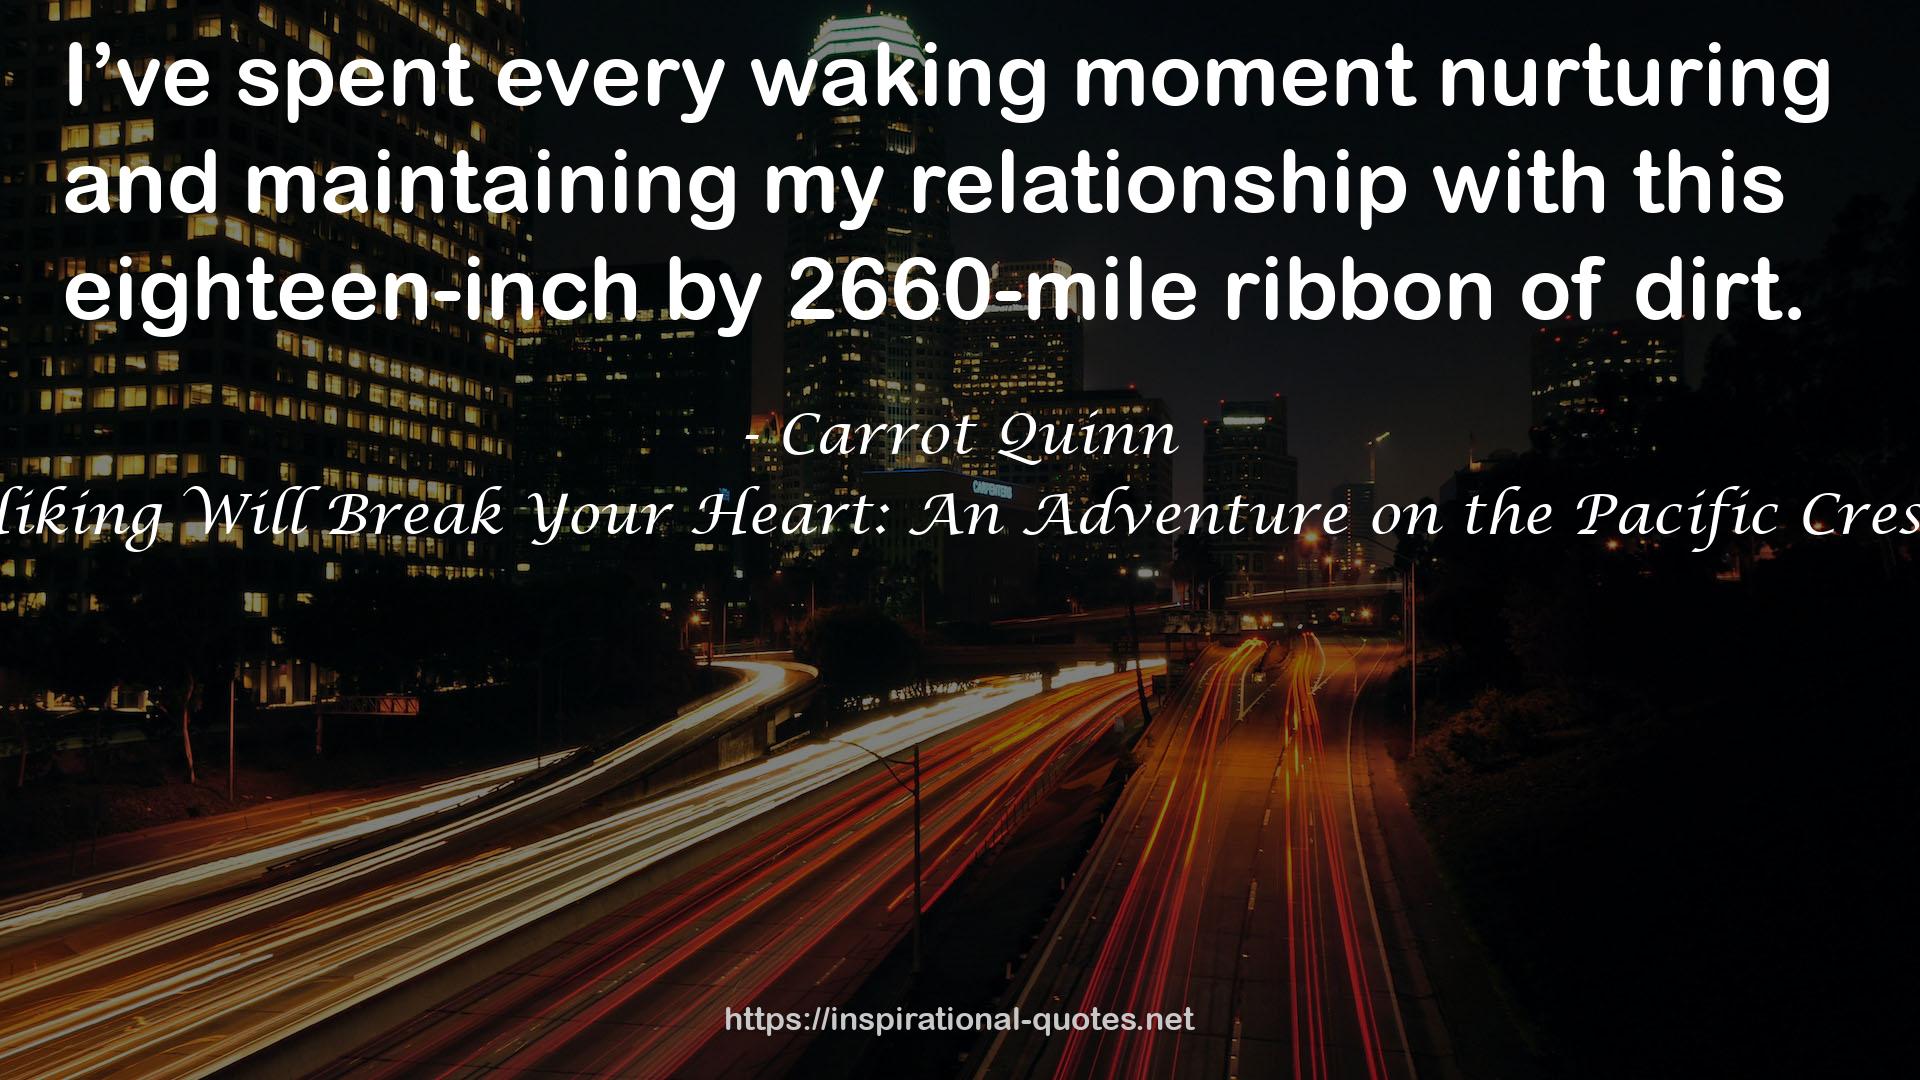 Carrot Quinn QUOTES